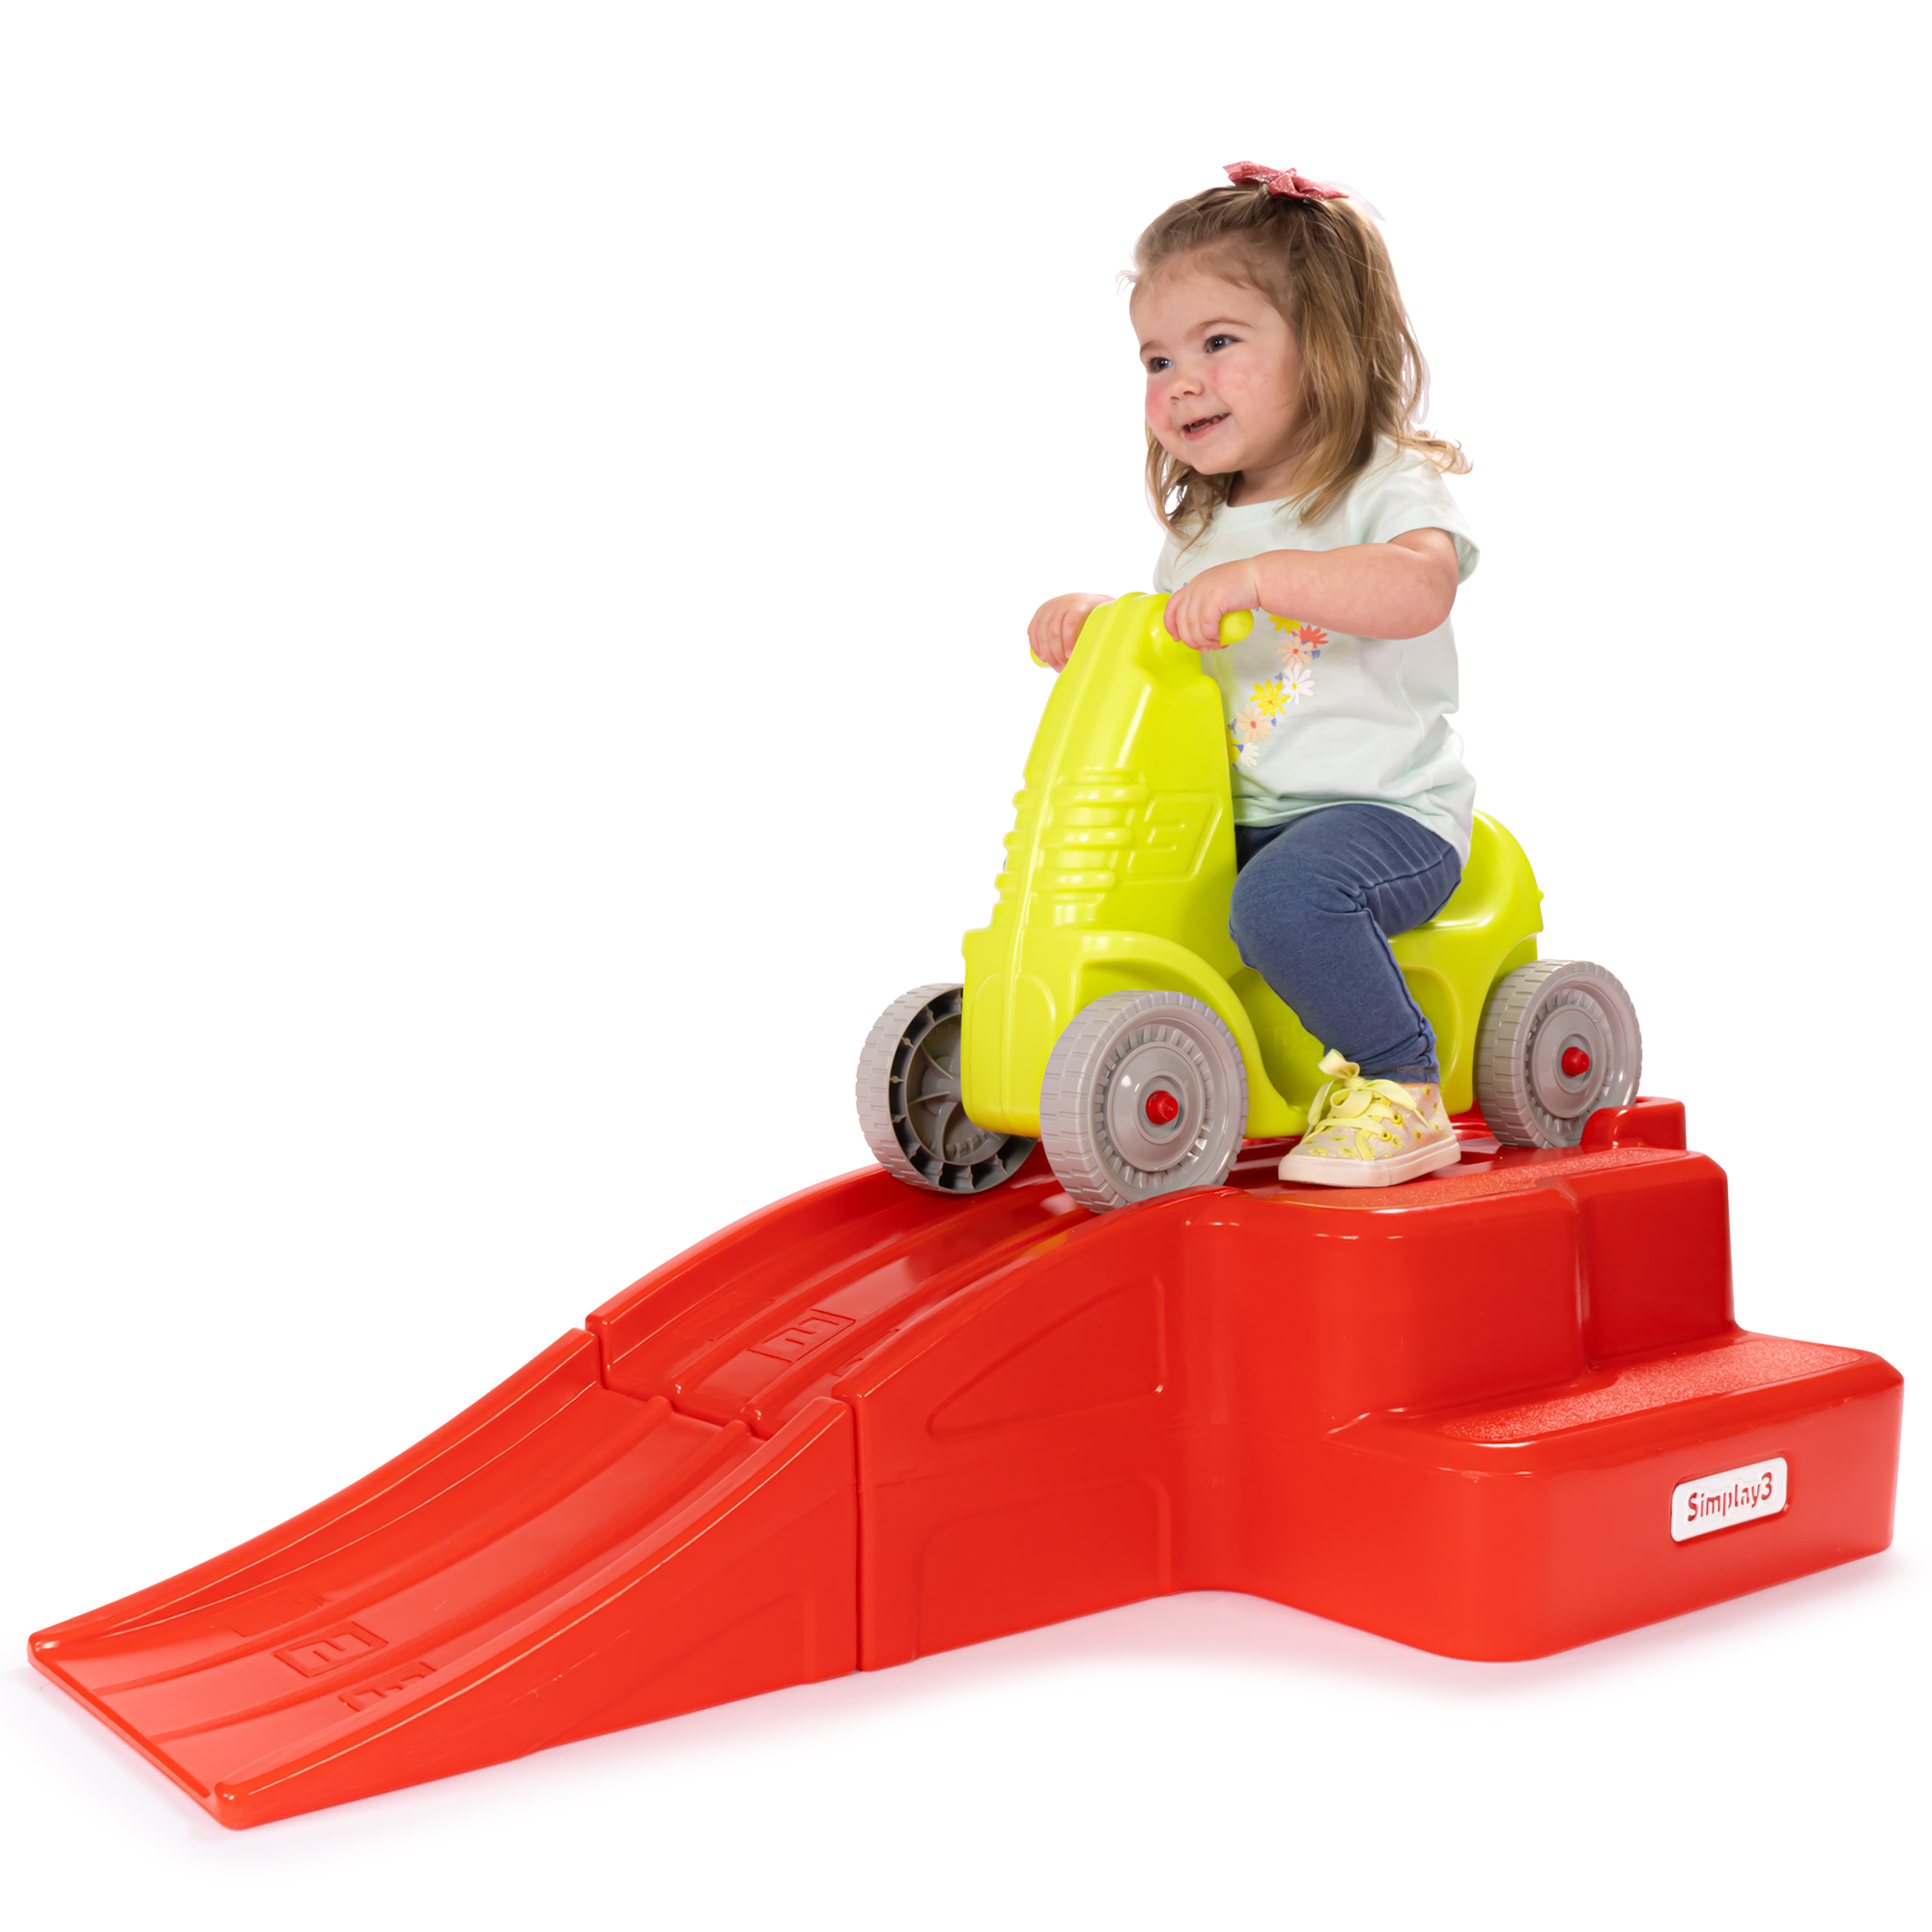 Downhill Thrill Kids Coaster by Simplay3